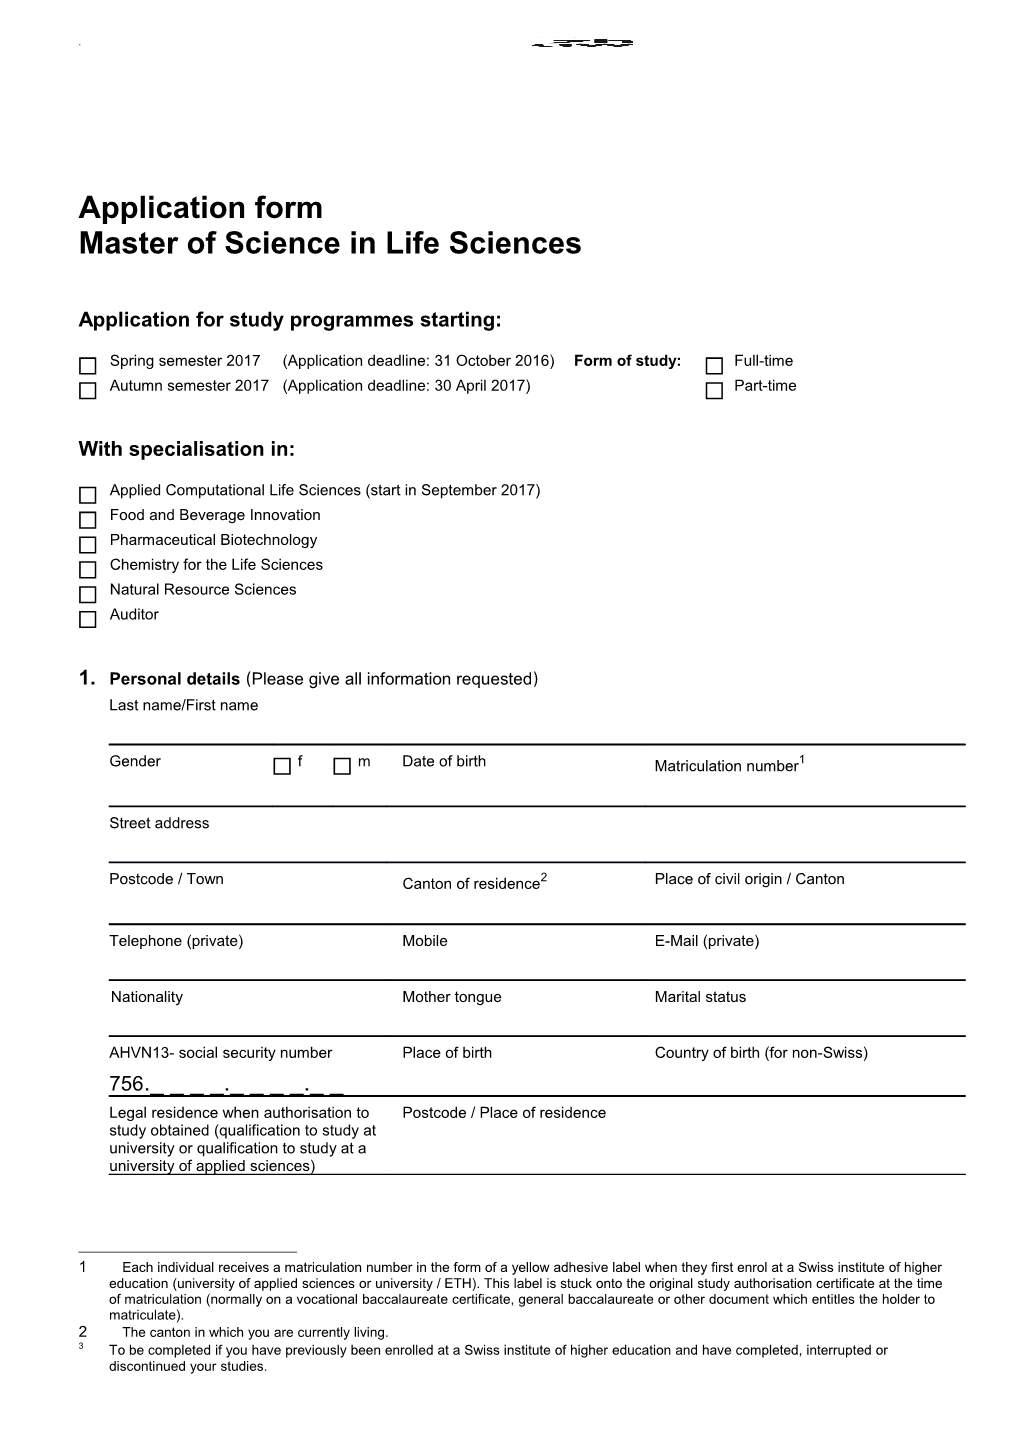 Master of Science in Life Sciences